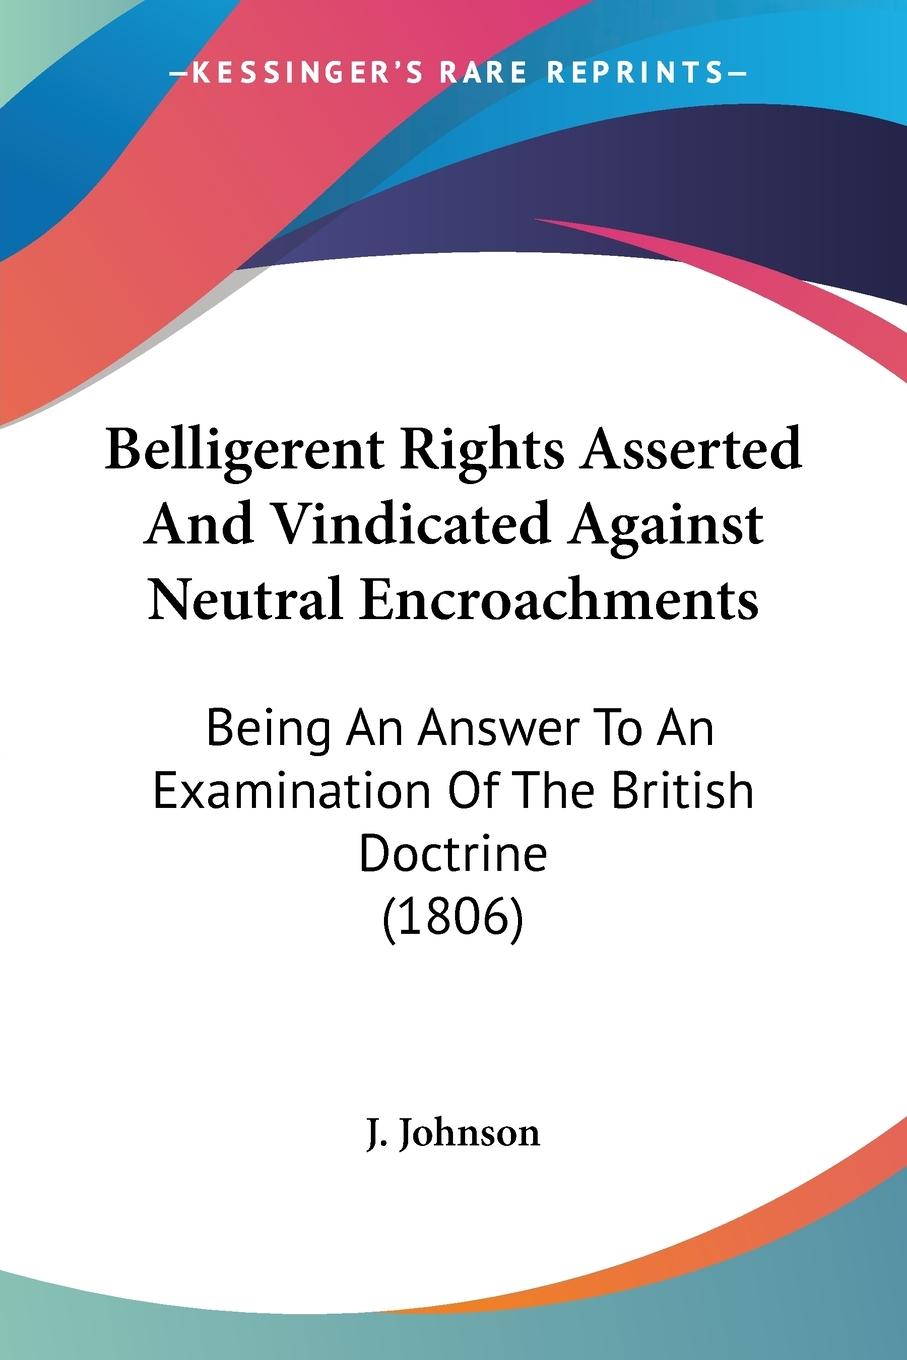 Belligerent Rights Asserted And Vindicated Against Neutral Encroachments - J. Johnson